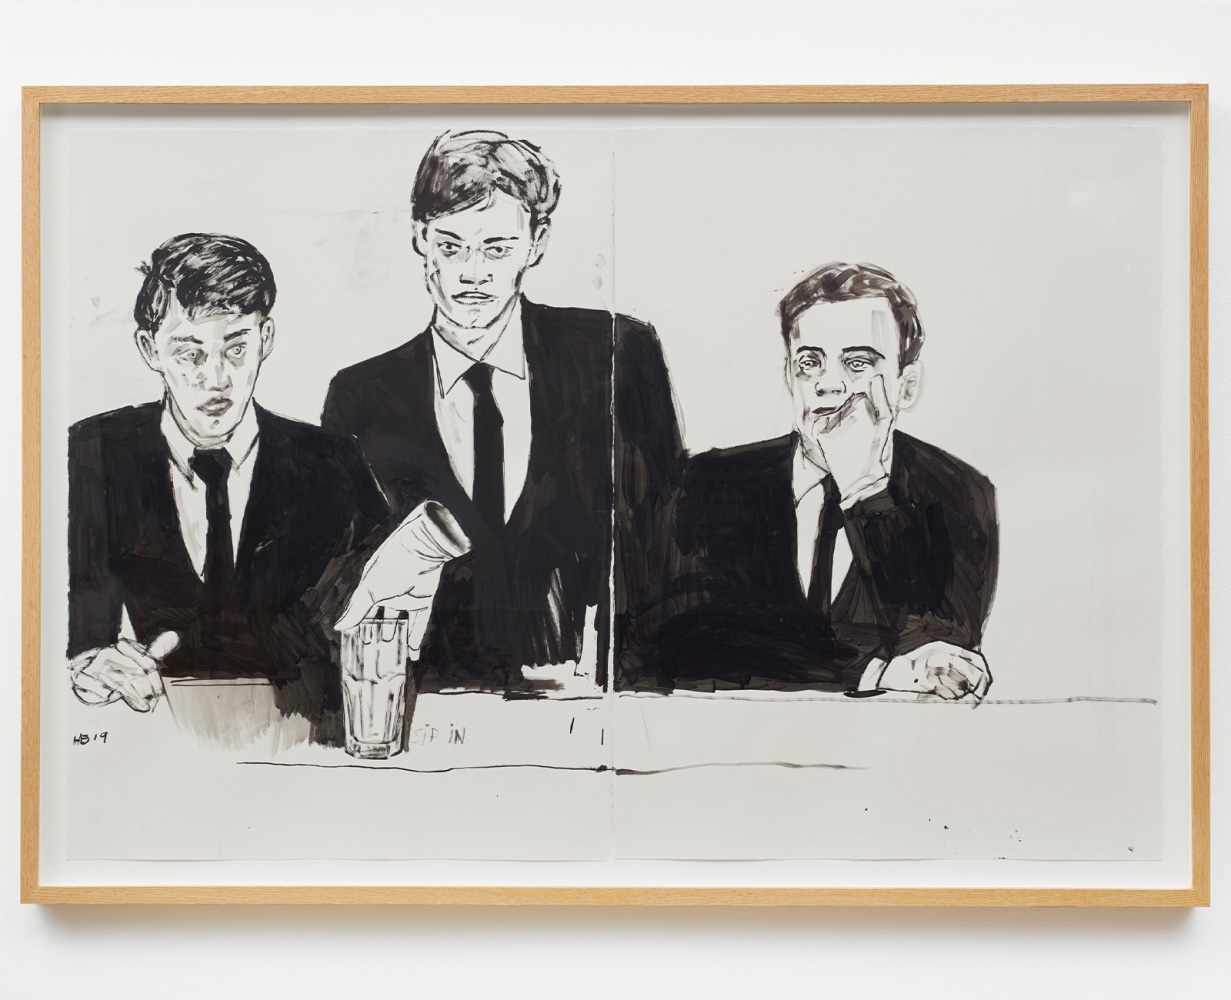 HERNAN BAS

Sip In (study), 2019

Pencil and ink on paper

30 x 45 inches (paper)

76.2 x 114.3 cm

33.5 x 48.5 x 2 inches (framed)

85.1 x 123.2 x 5.1 cm